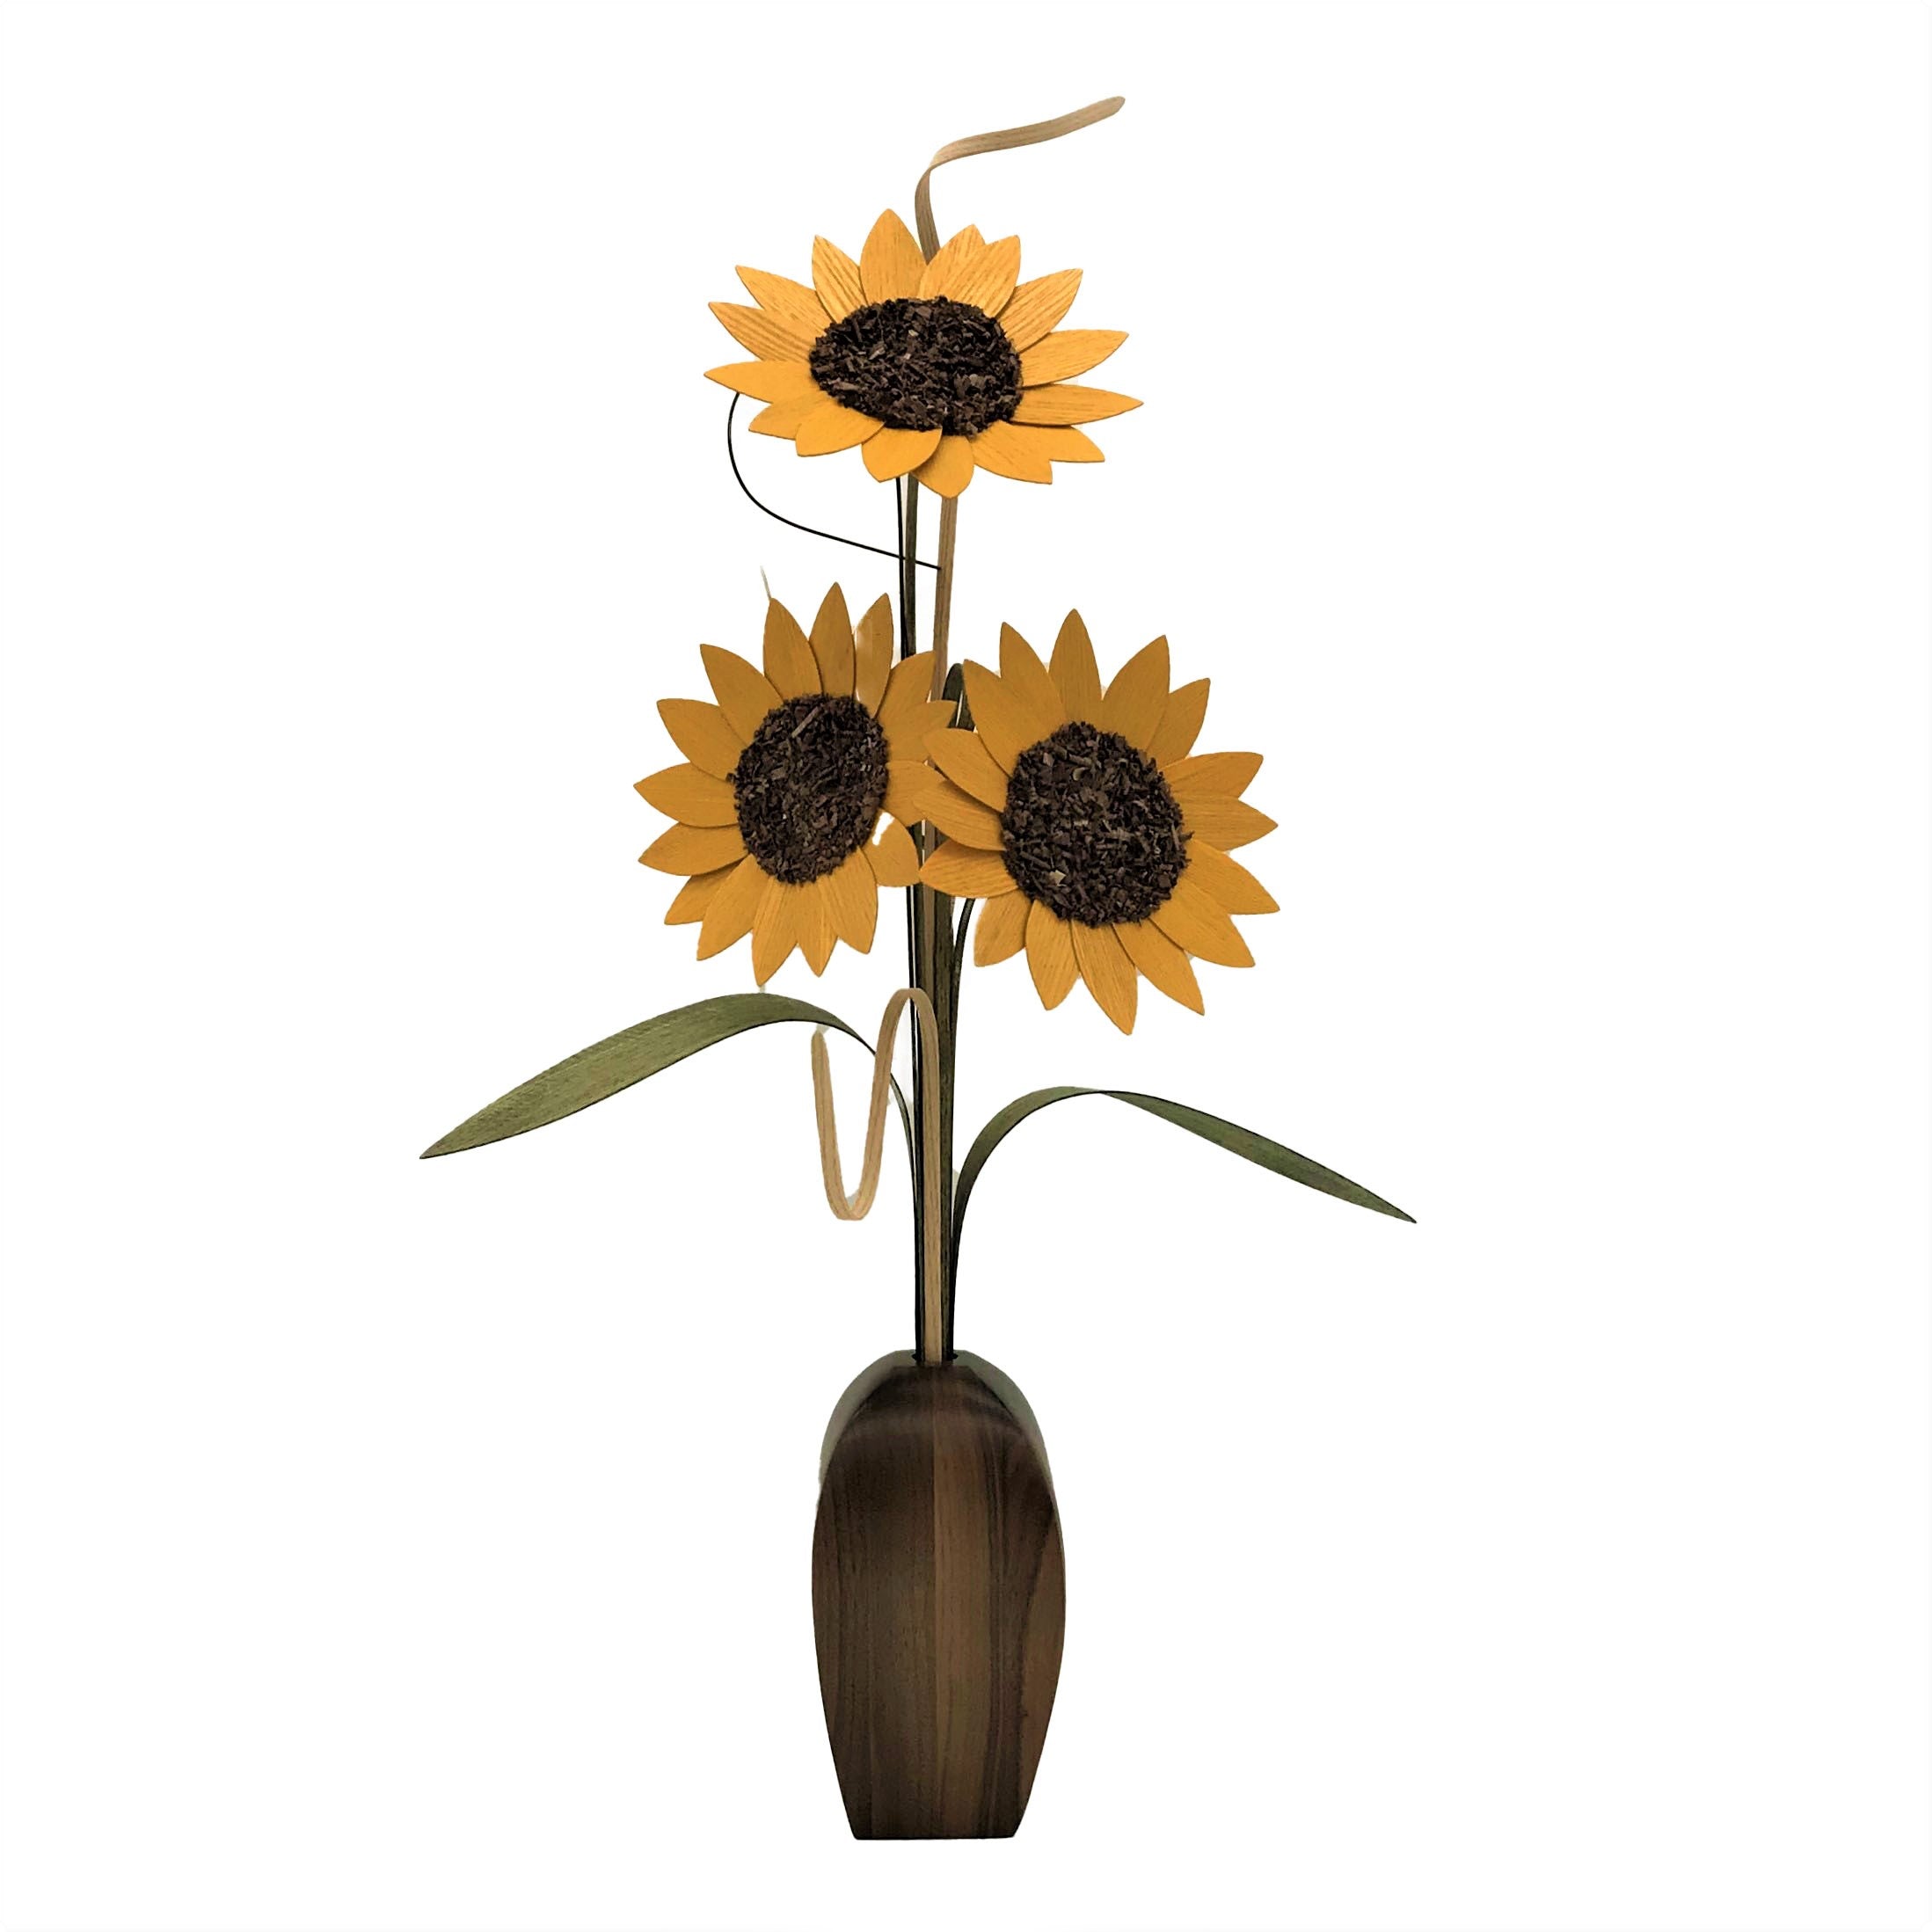 Wood Wildflowers - Walnut Expressions Vase with Three Flowers